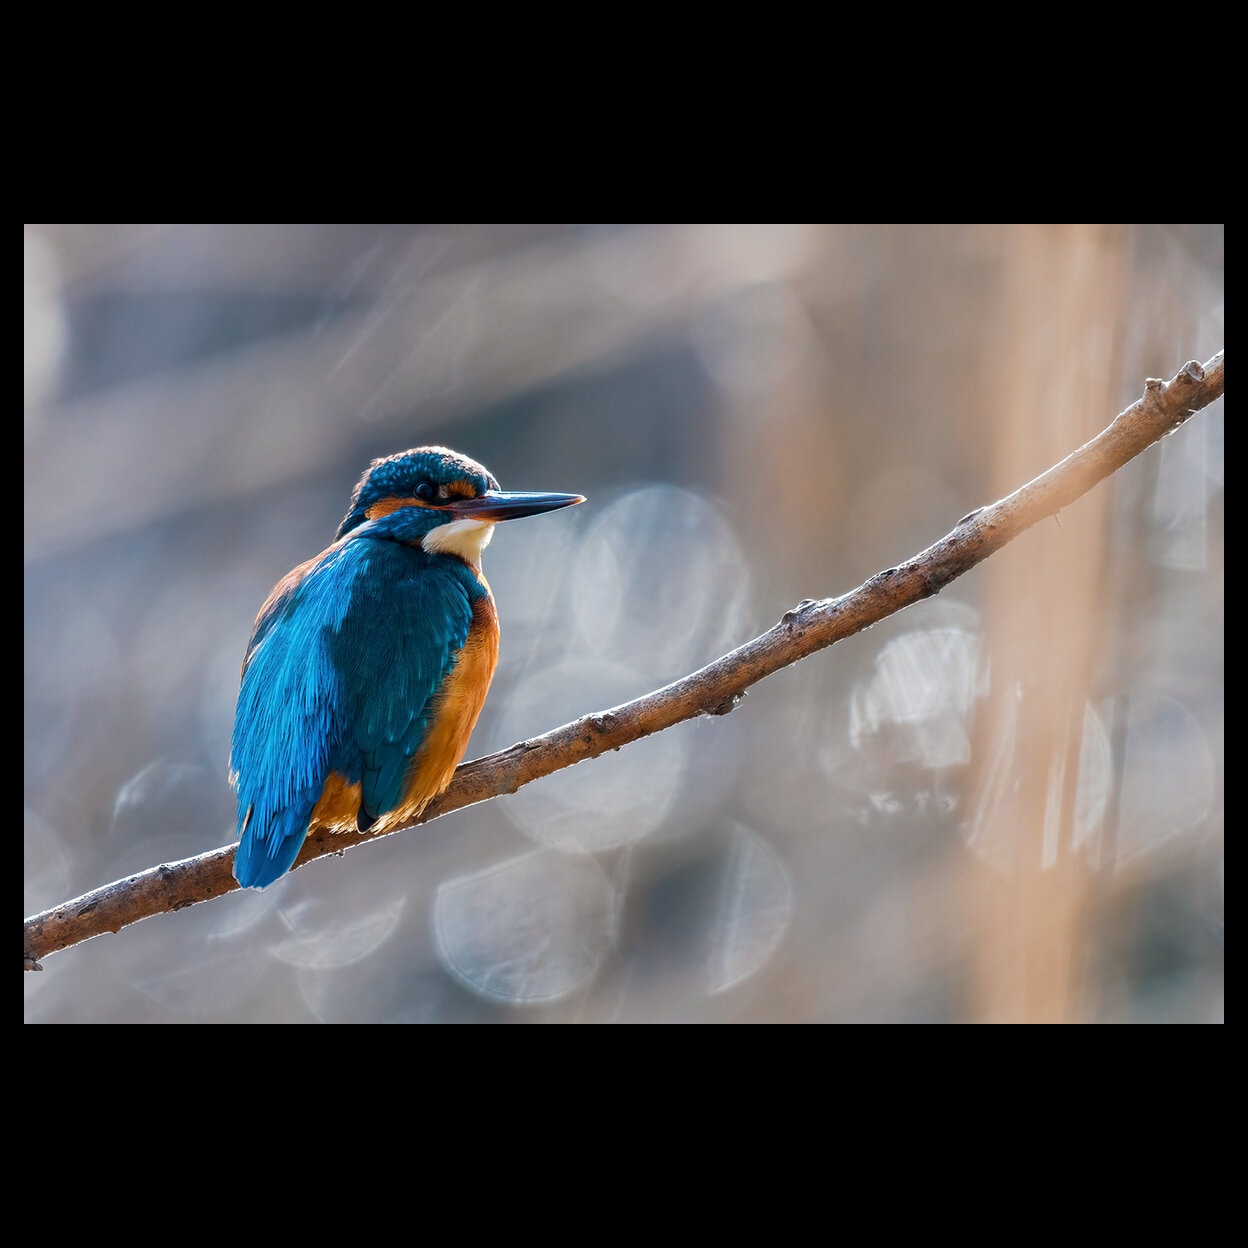 A striking bird, the kingfisher with vibrant blue plumage and orange stripes on its head and belly.